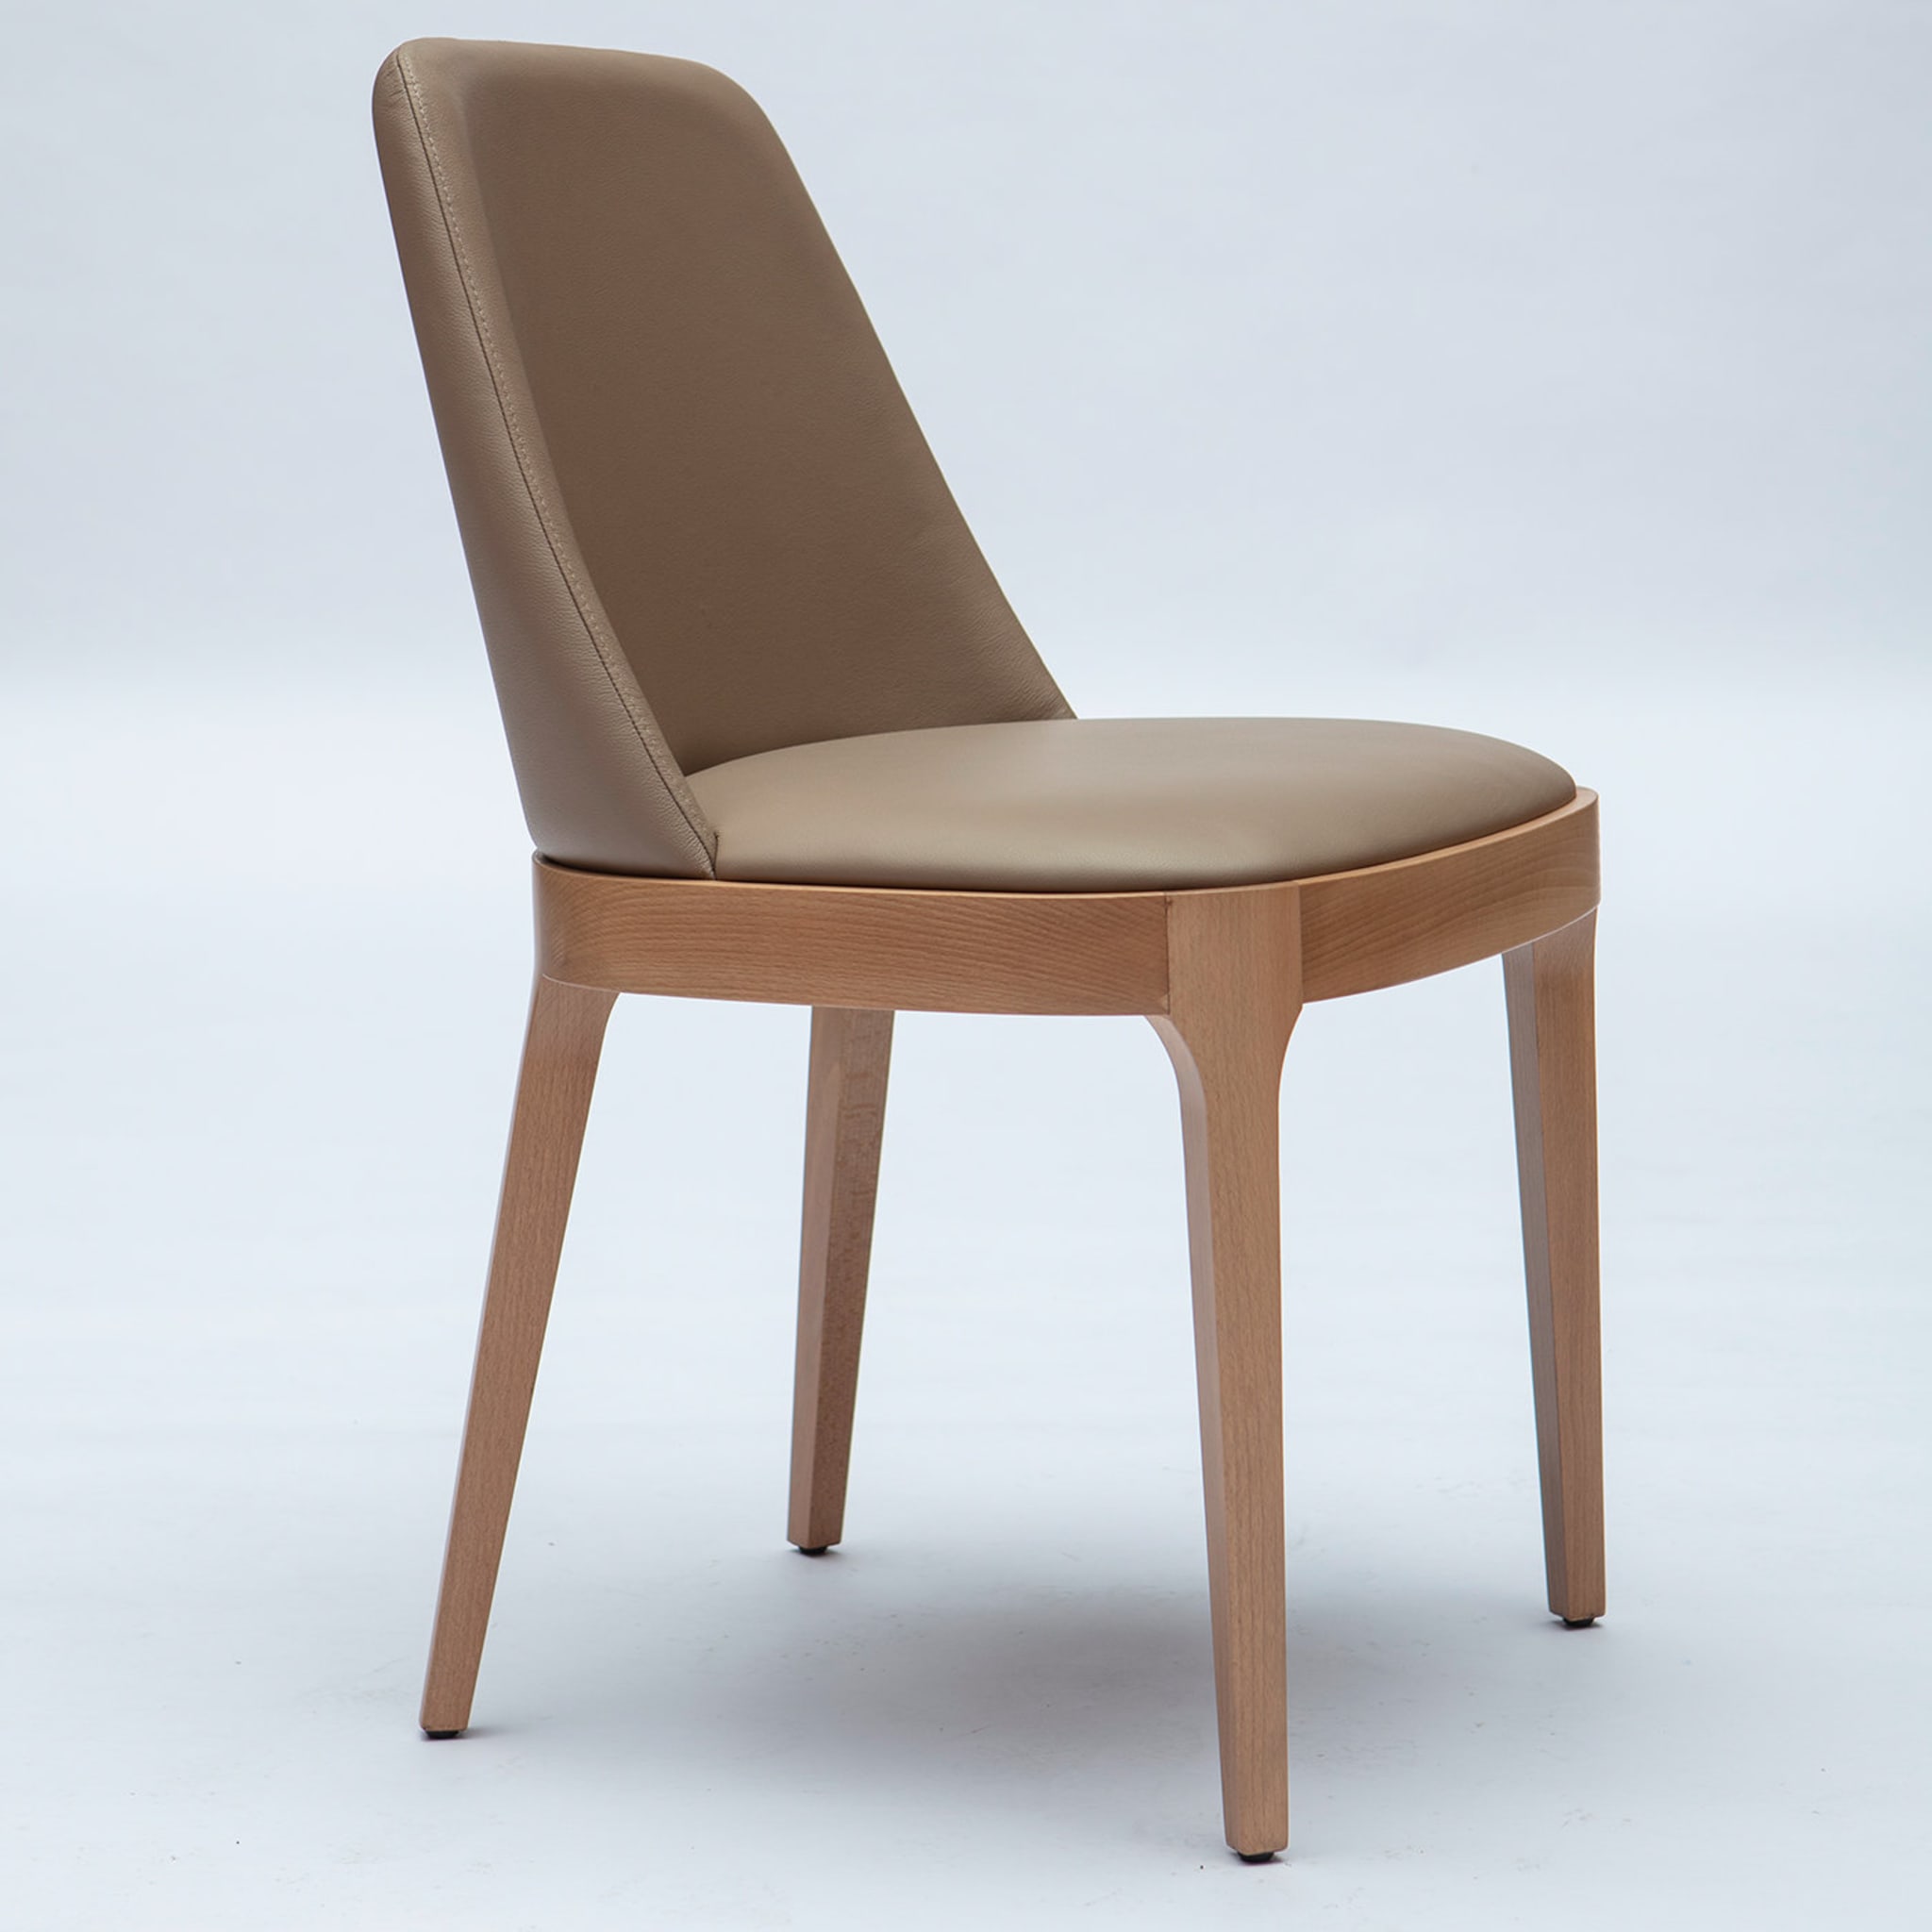 Club 24 leather dining chair - Alternative view 2